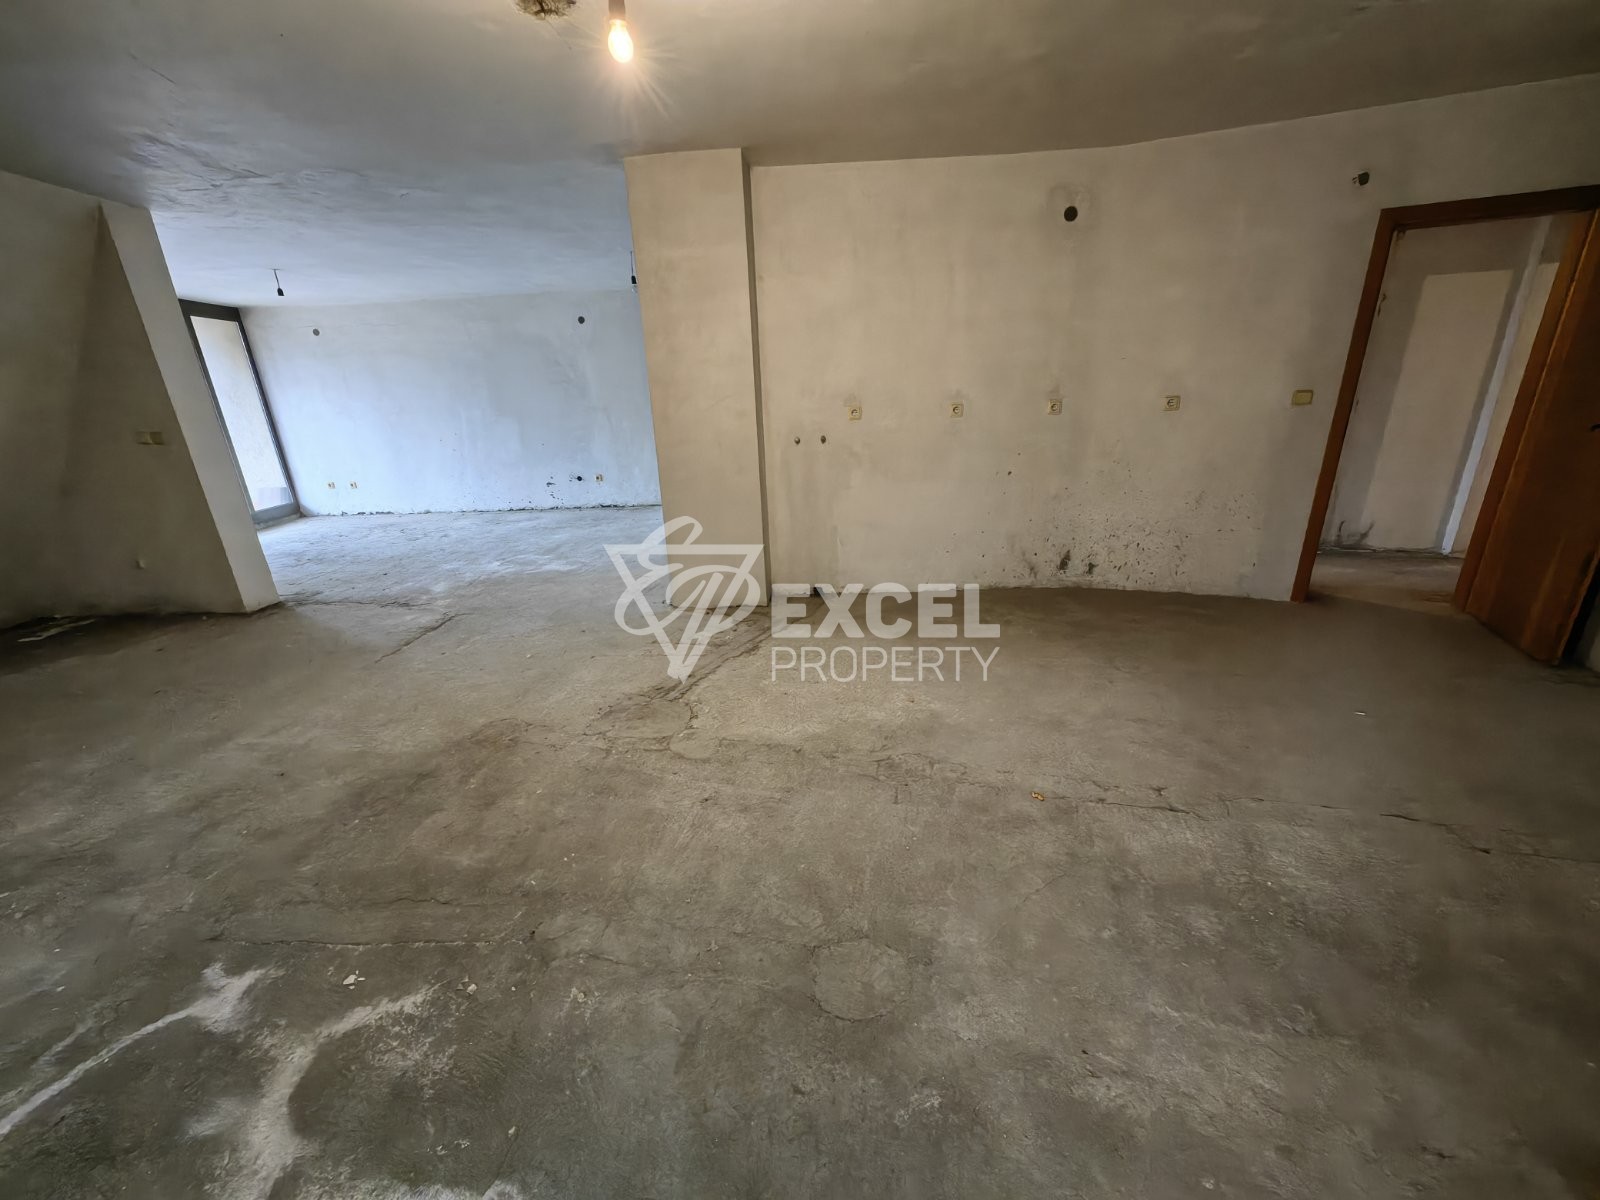 South one-bedroom apartment with basement in the center of Razlog